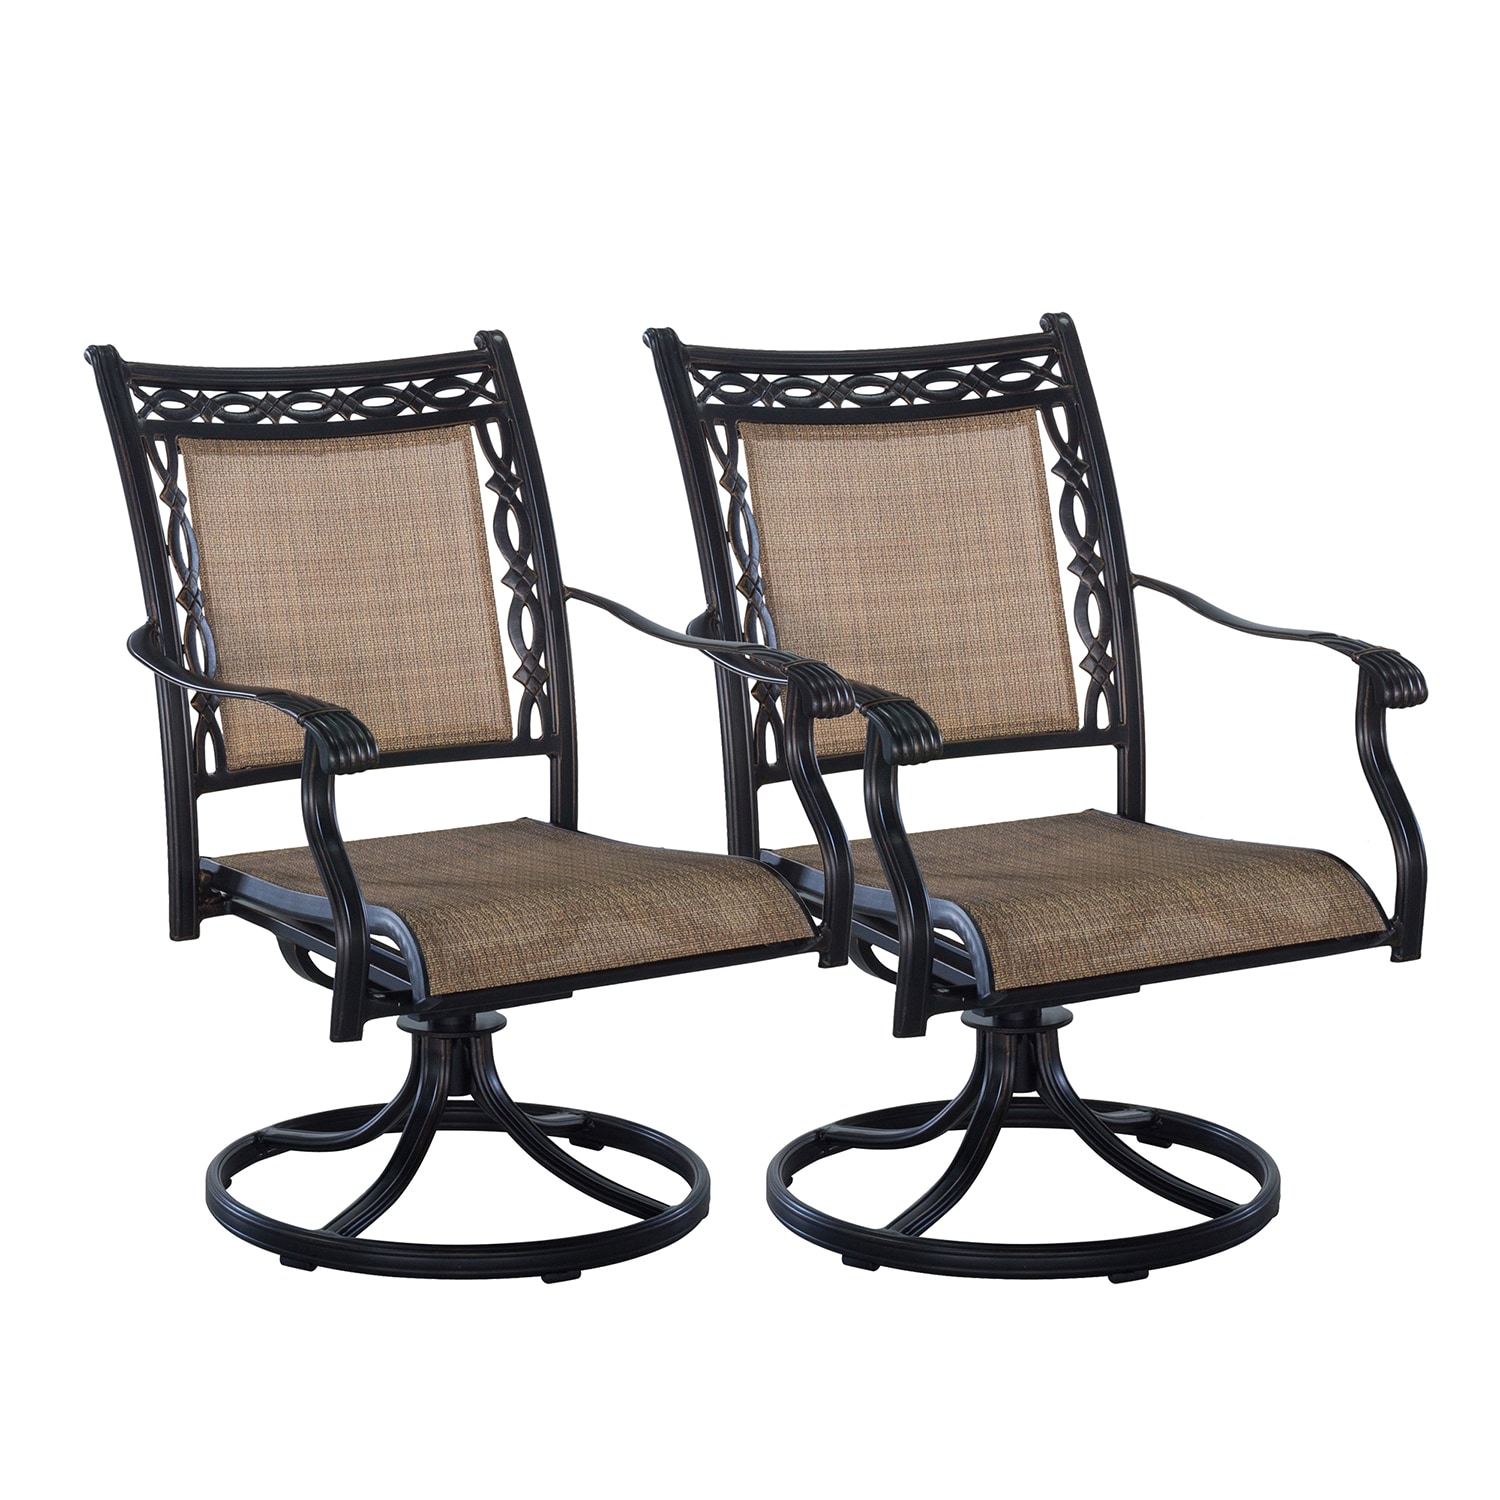 Small Grid Omelaza Patio Metal Swivel Chairs Set of 2 Outdoor Dining Rocker Chair for Garden Backyard Bistro Black with Cushion Support 300 lbs 